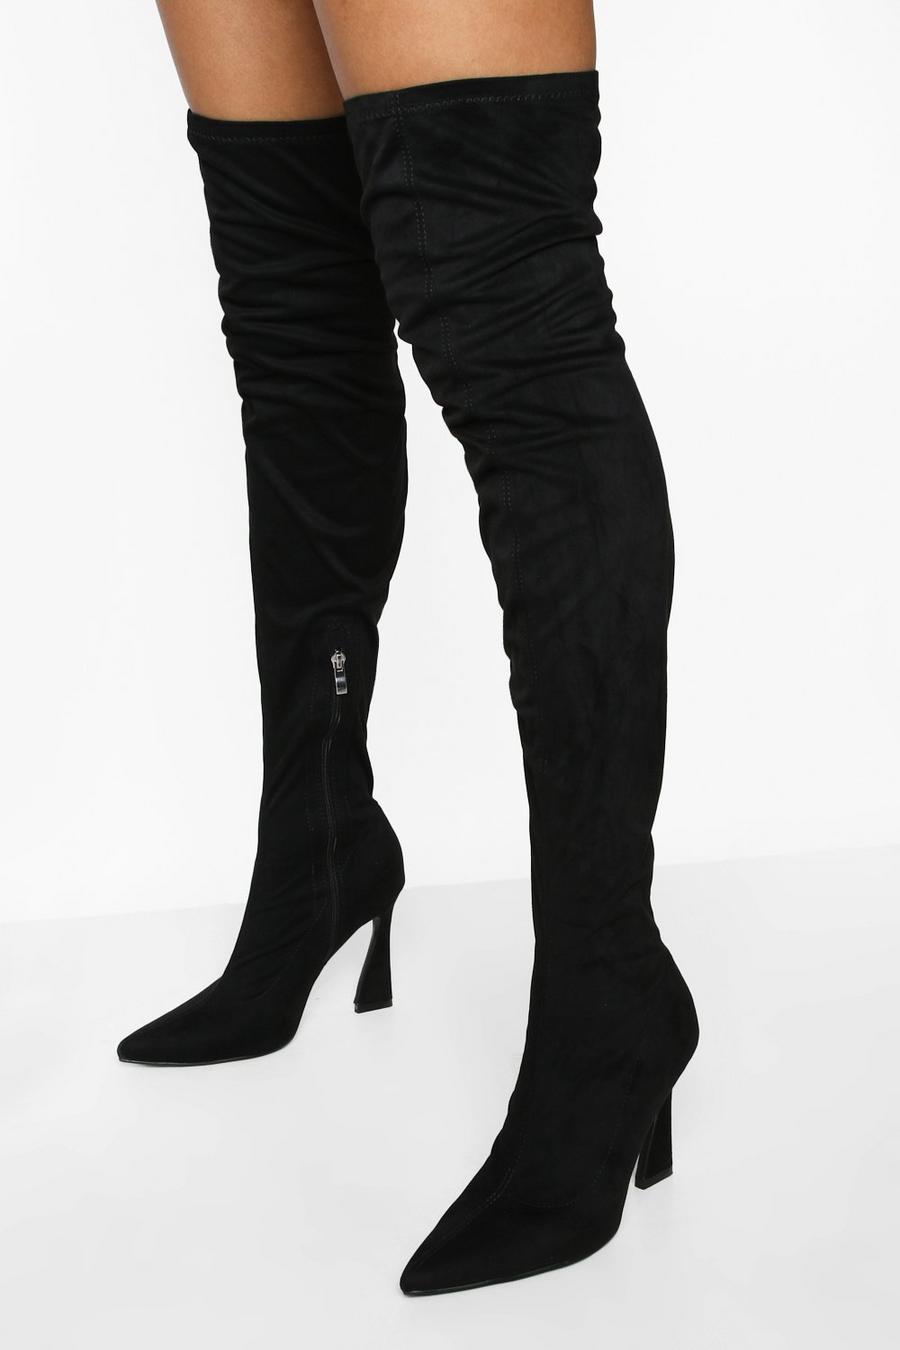 Black noir Wide Fit Pointed Toe Over The Knee Boots